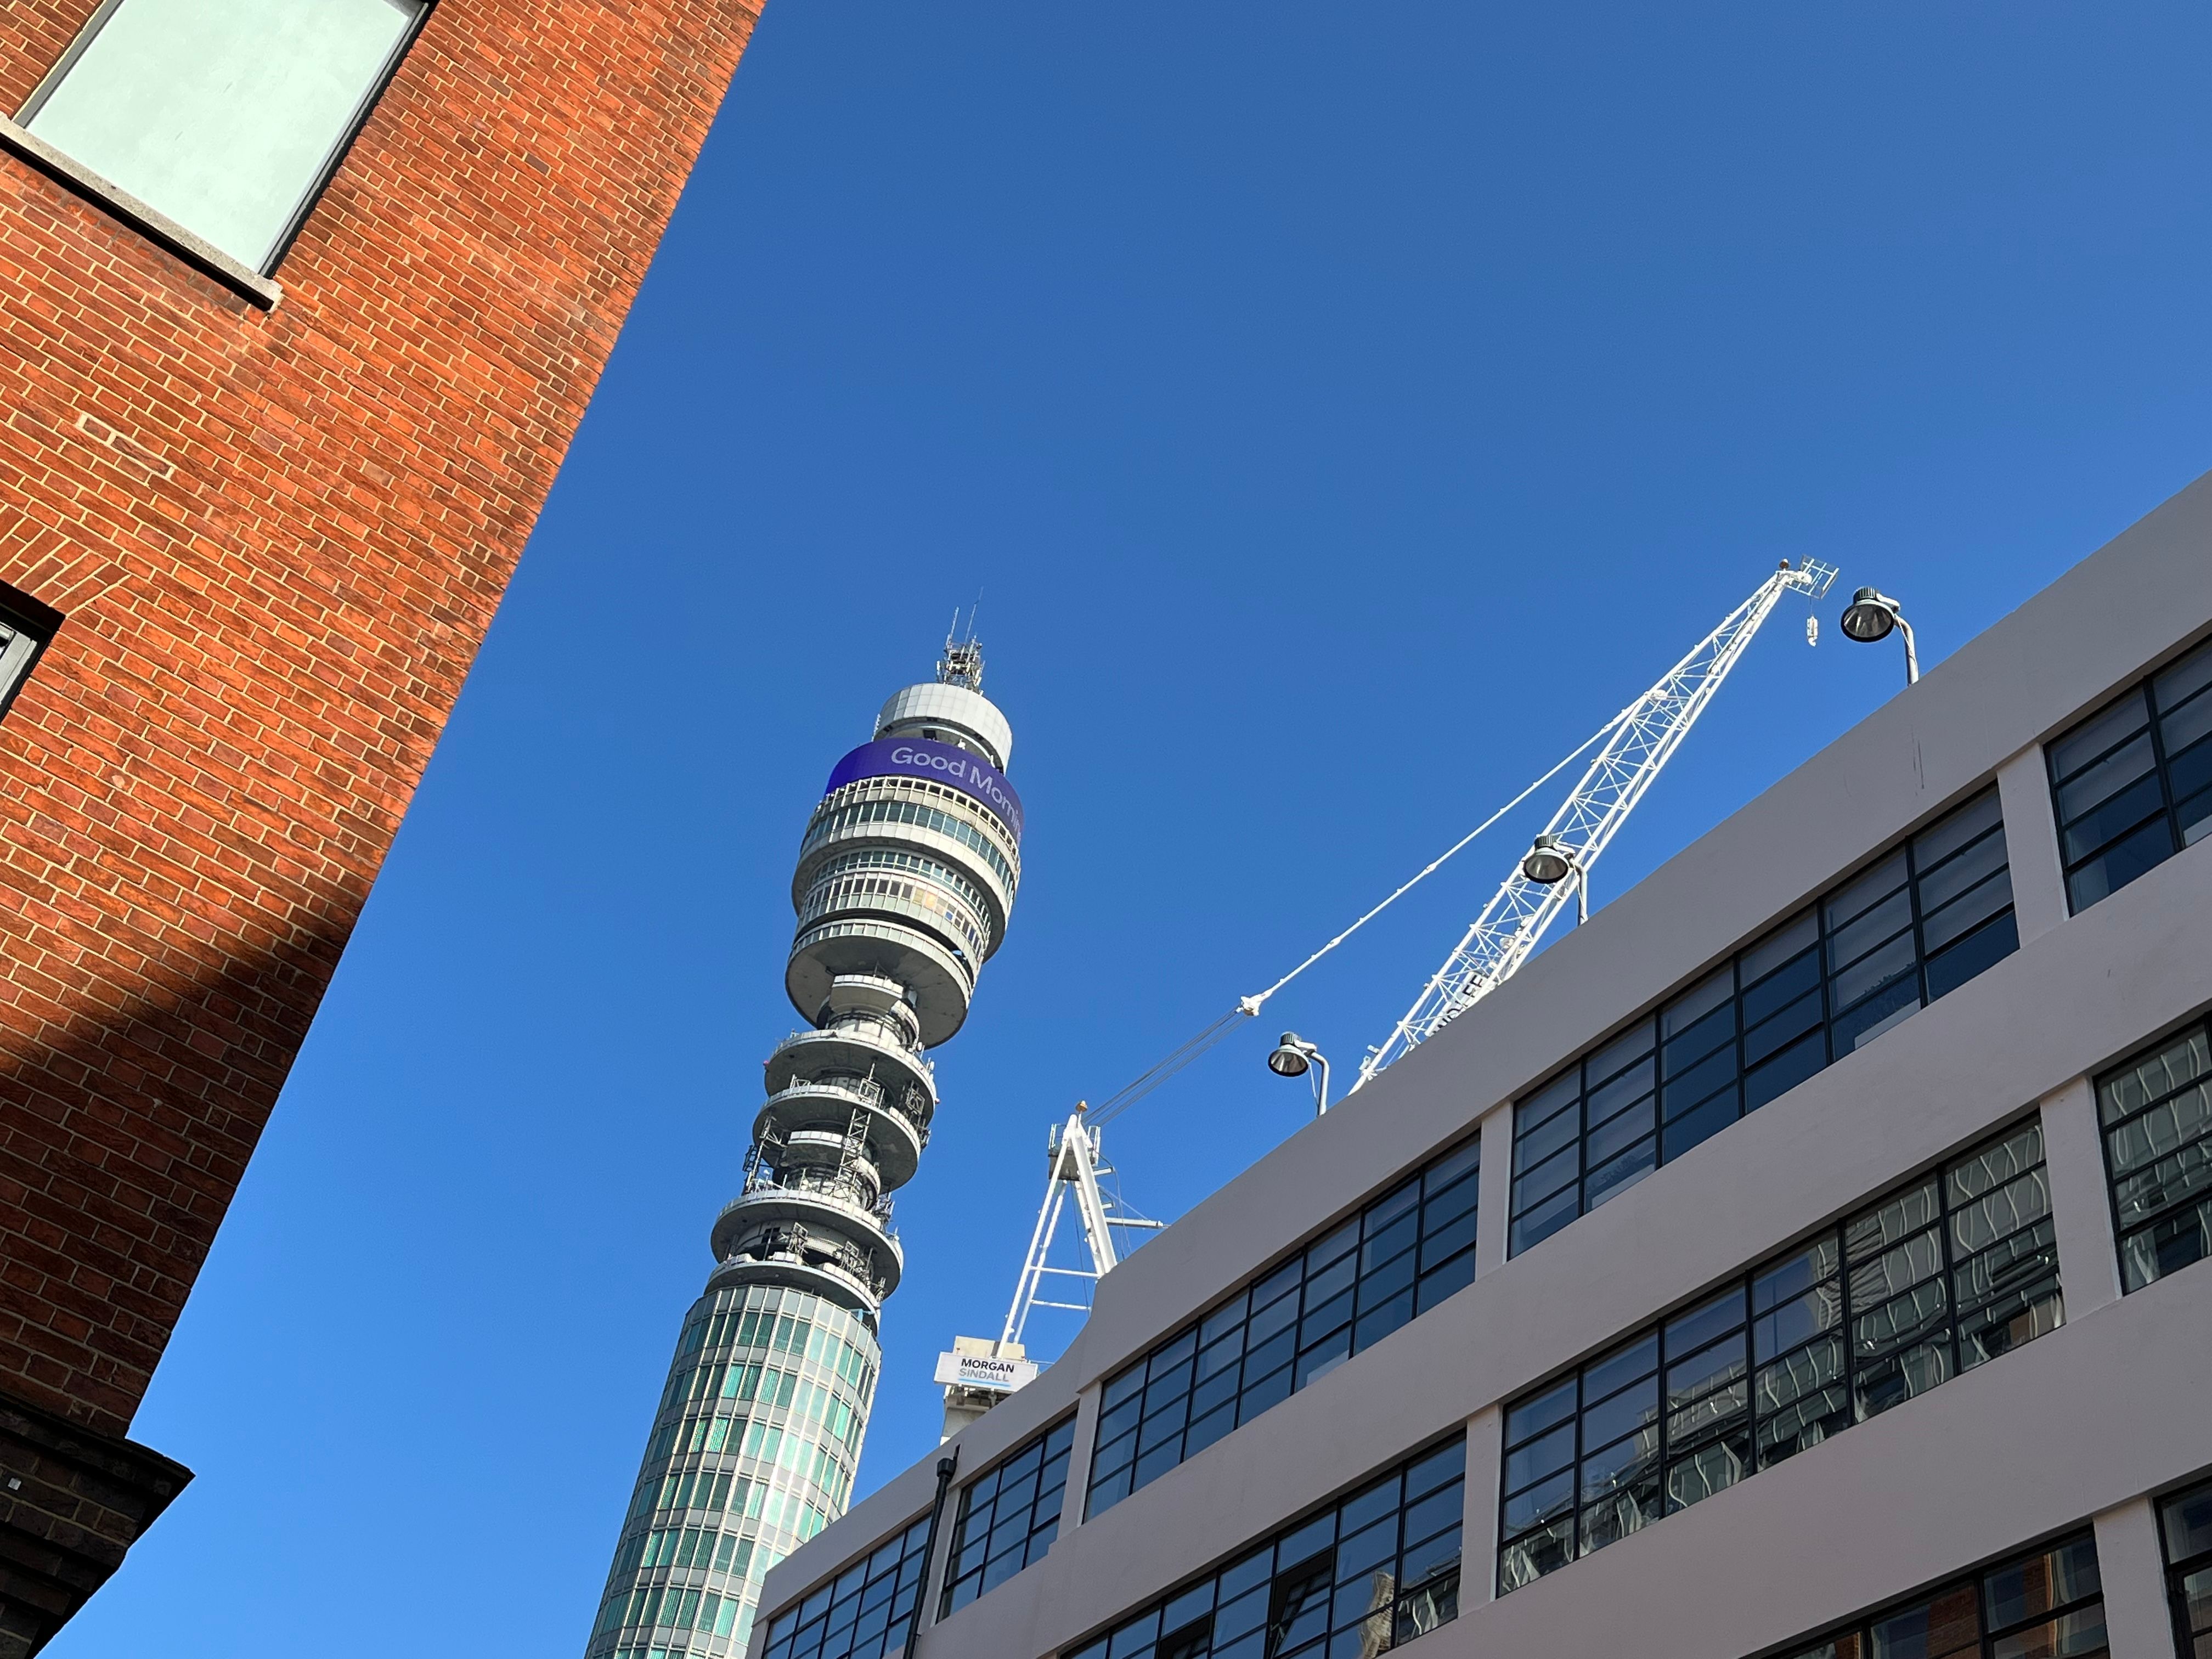 BT tower with backdrop ofbright blue sky